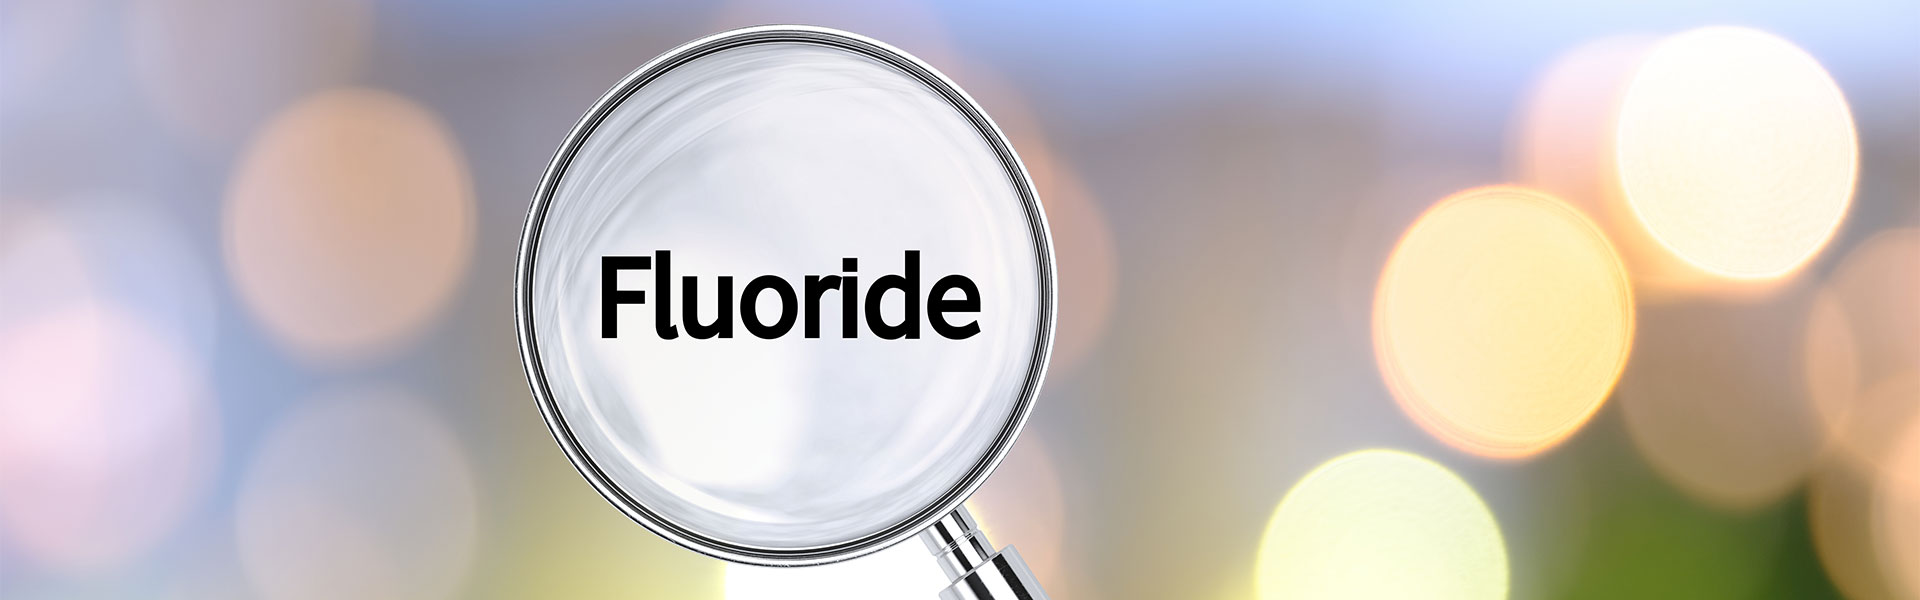 How to Reduce Your Industrial Fluoride Intake